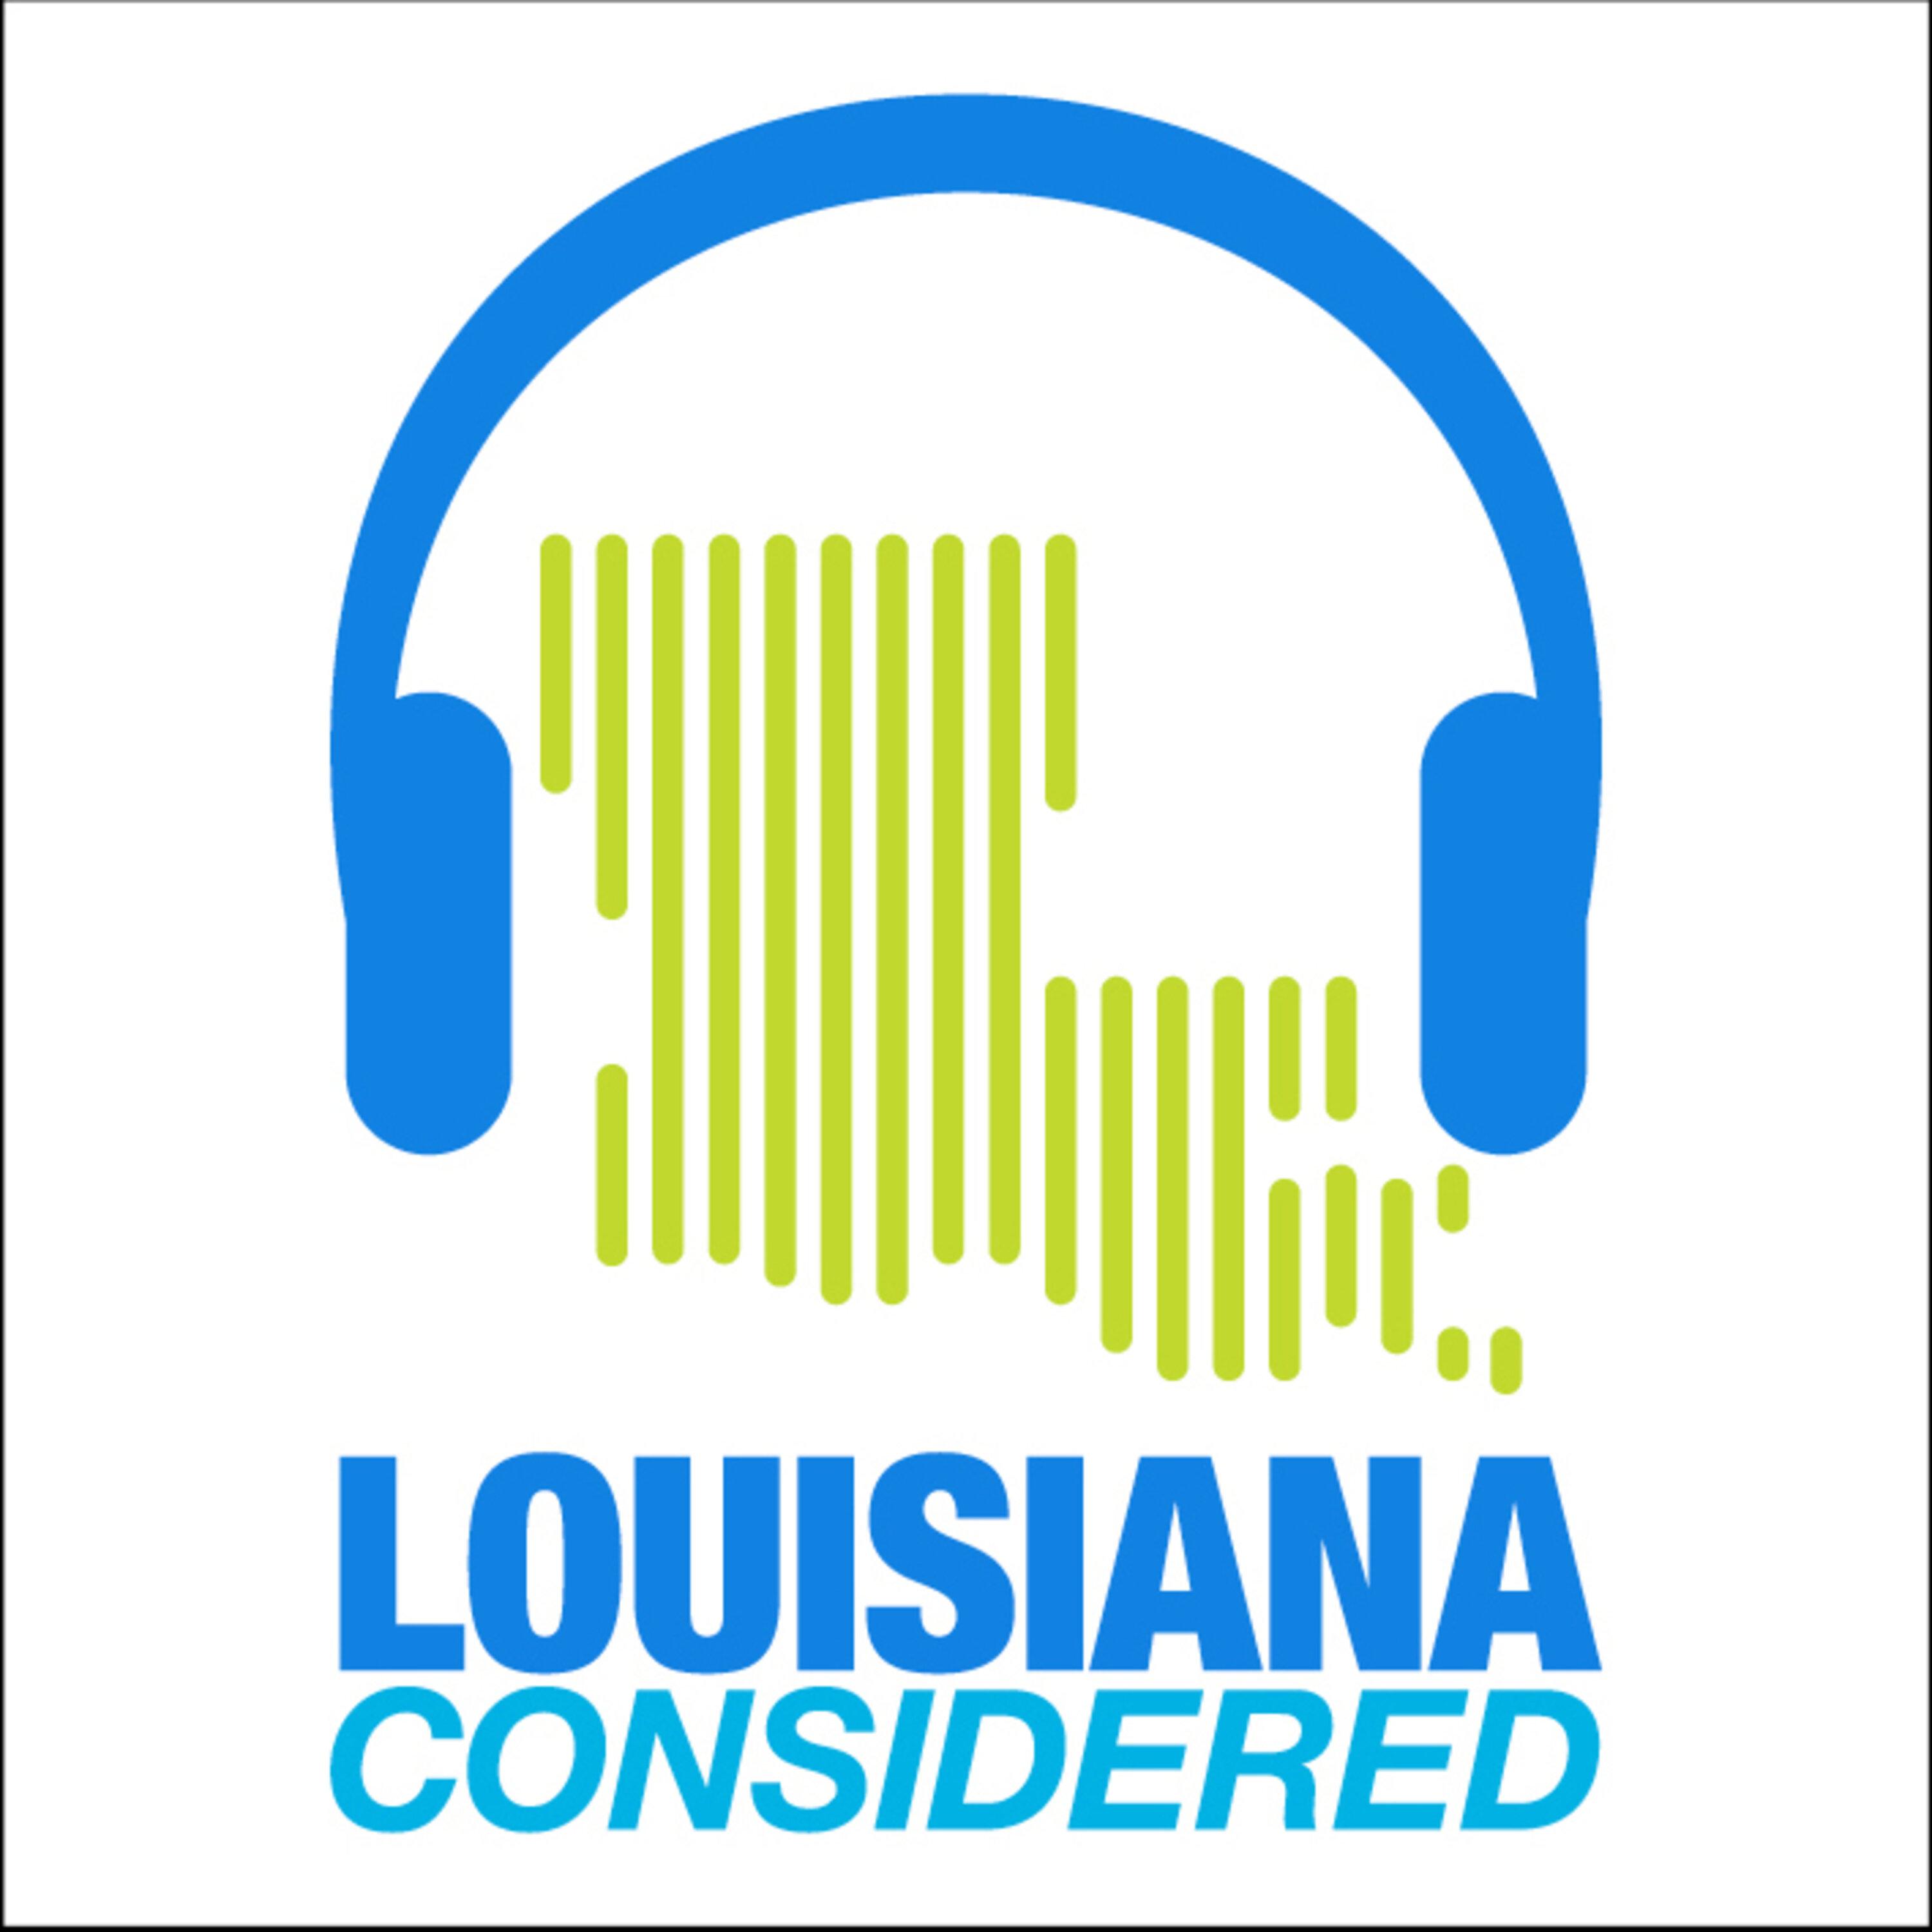 Thumbnail for "Louisiana Considered: Southern States See Sharp Decline In HIV Testing, Attendees’ Refusal To Wear Masks Derails Legislative Committee Meeting, Ramsey Lewis On What It Means To Be Cool".